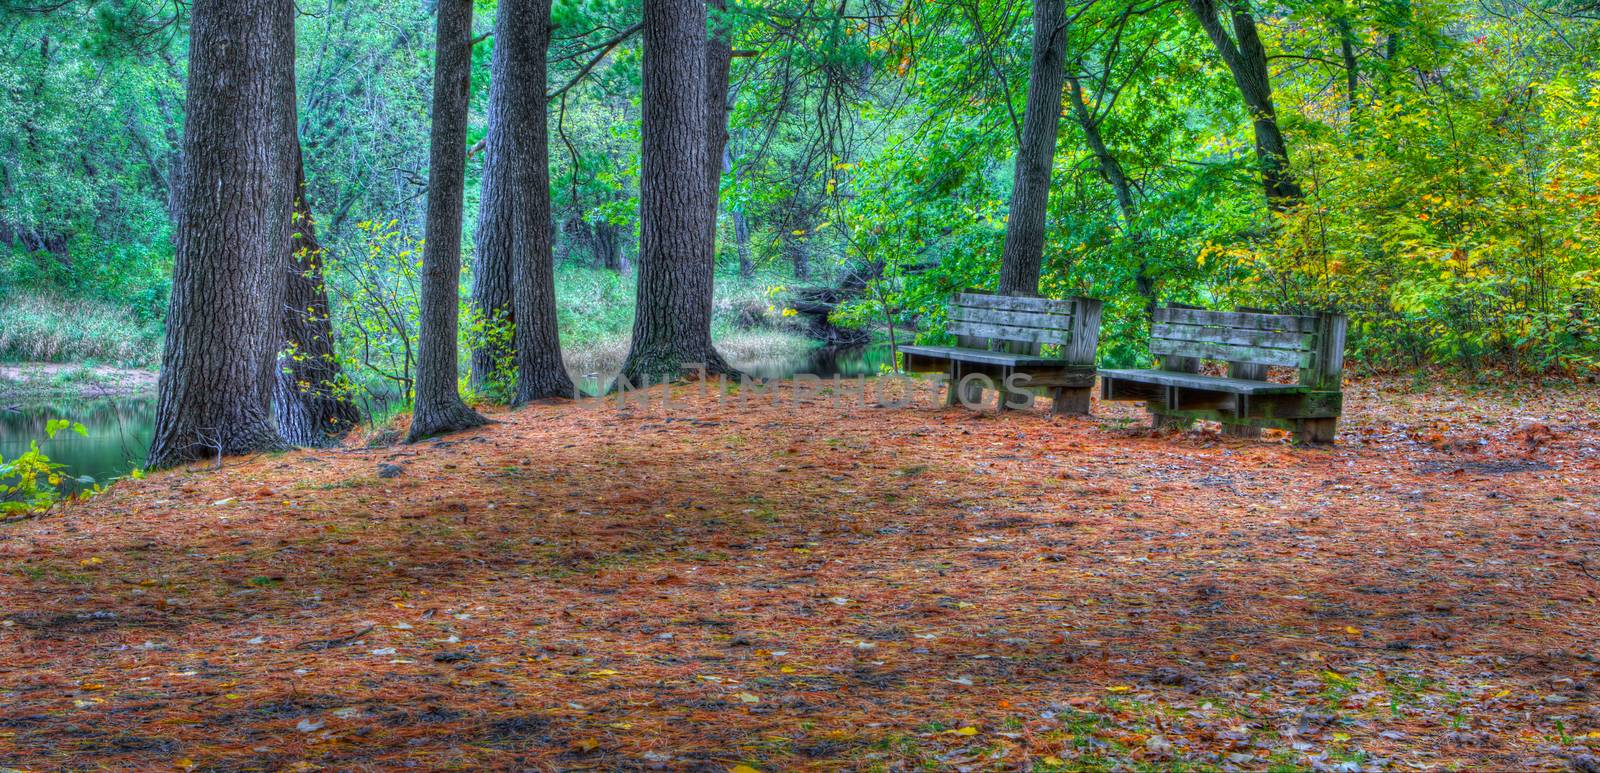 Bench in the middle of the forest foliage.